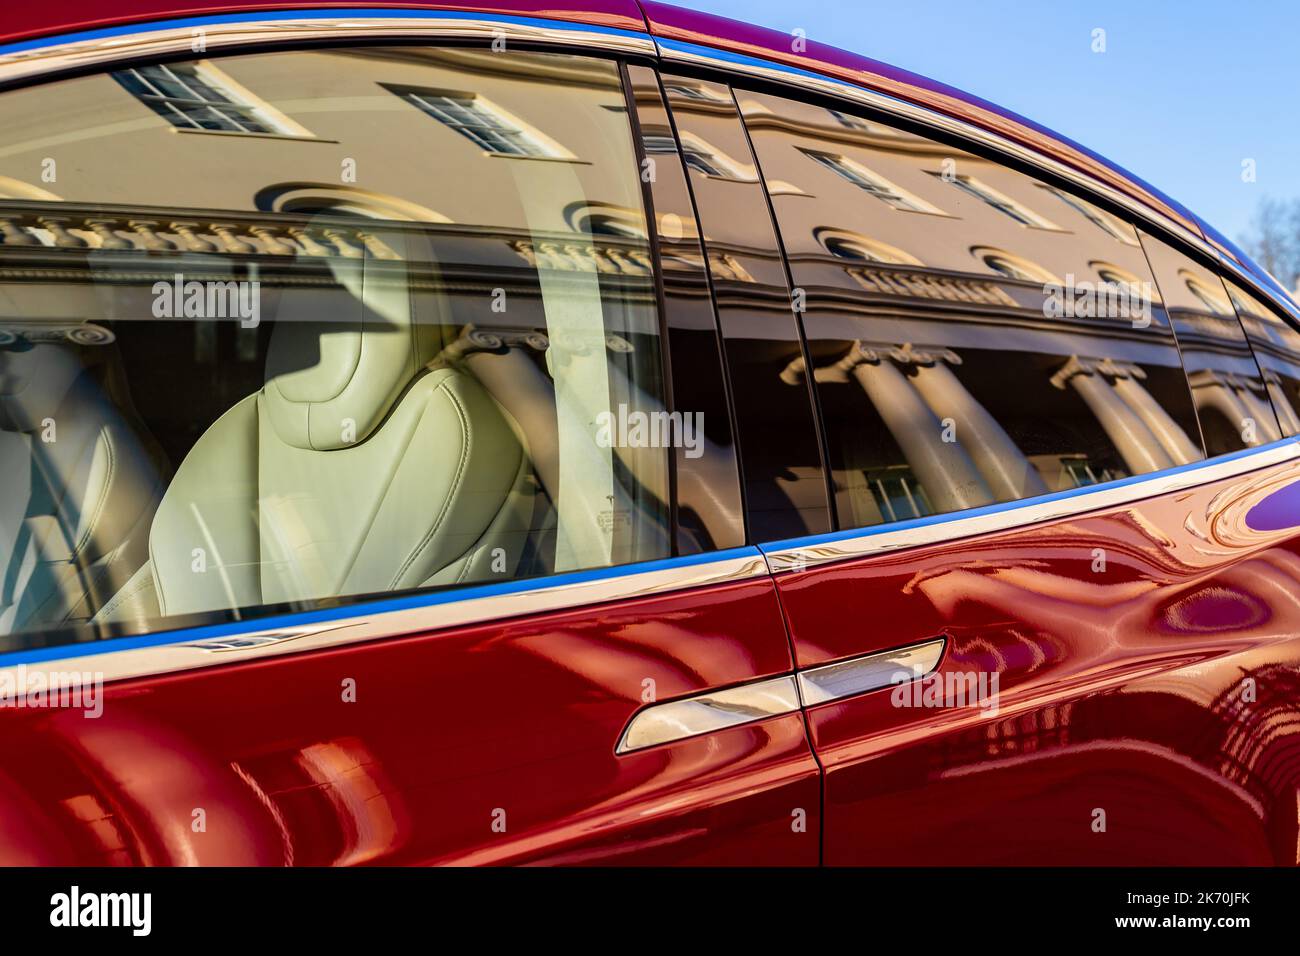 A beautiful Tesla  vehicle is parked outside  part of the famous Nash Terraces in central london.The image shows  Nash buildings reflected in the car Stock Photo